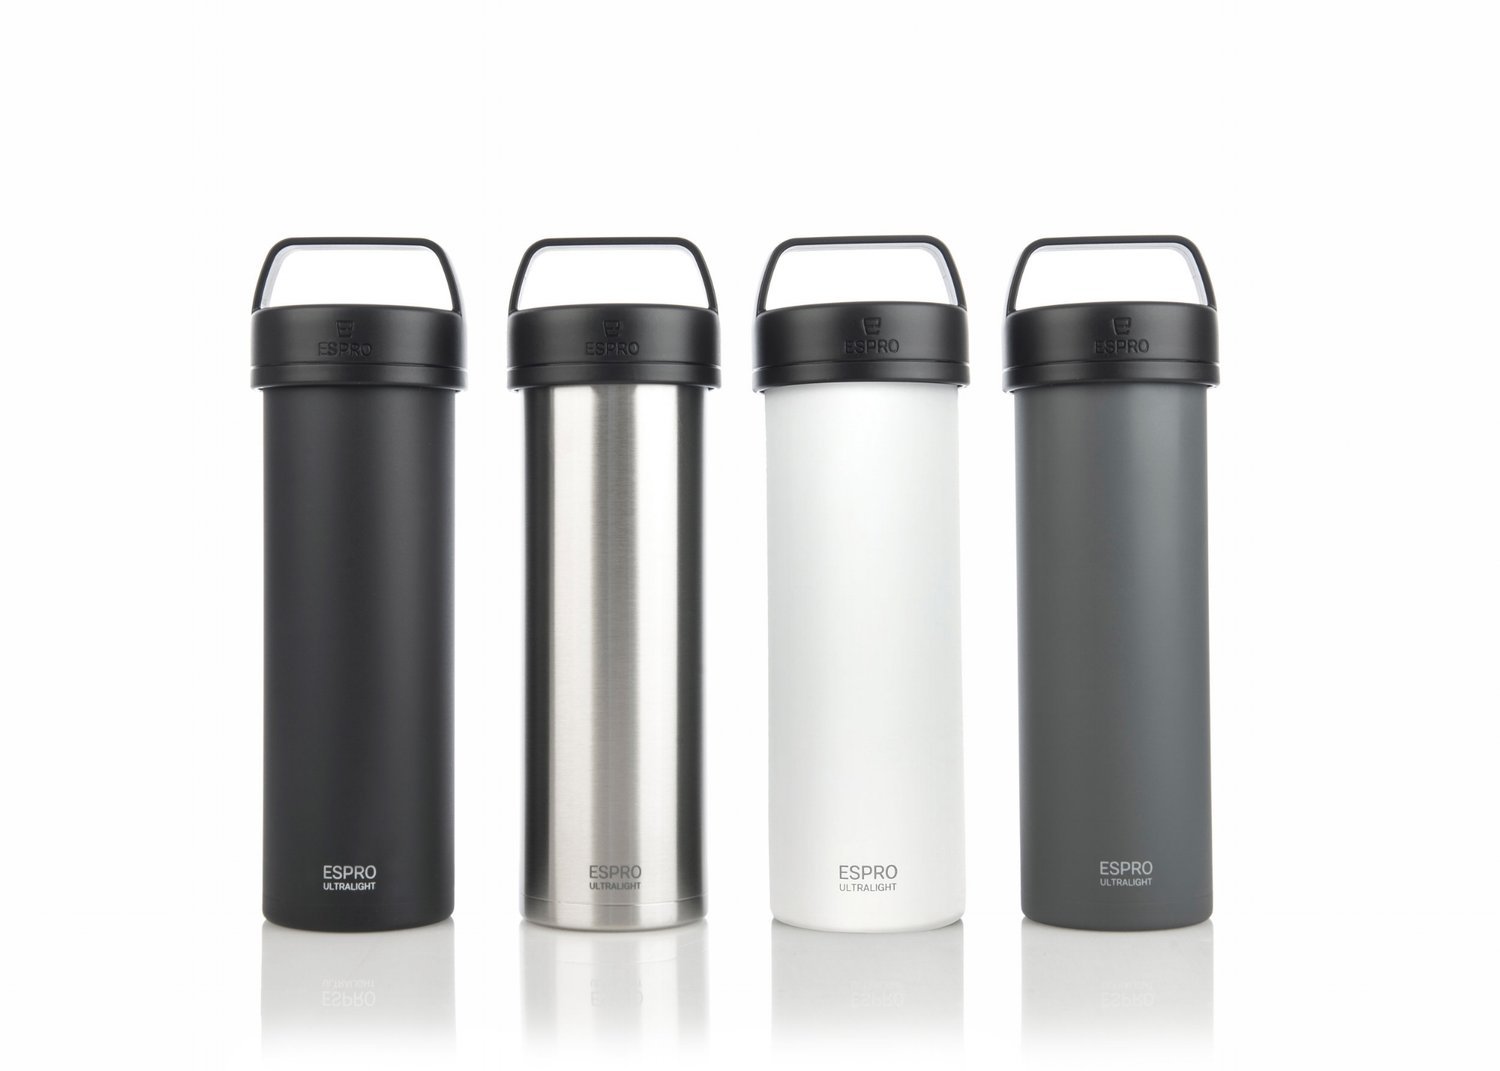 ESPRO Ultralight Travel Press Caffeinate & Hydrate Anywhere by